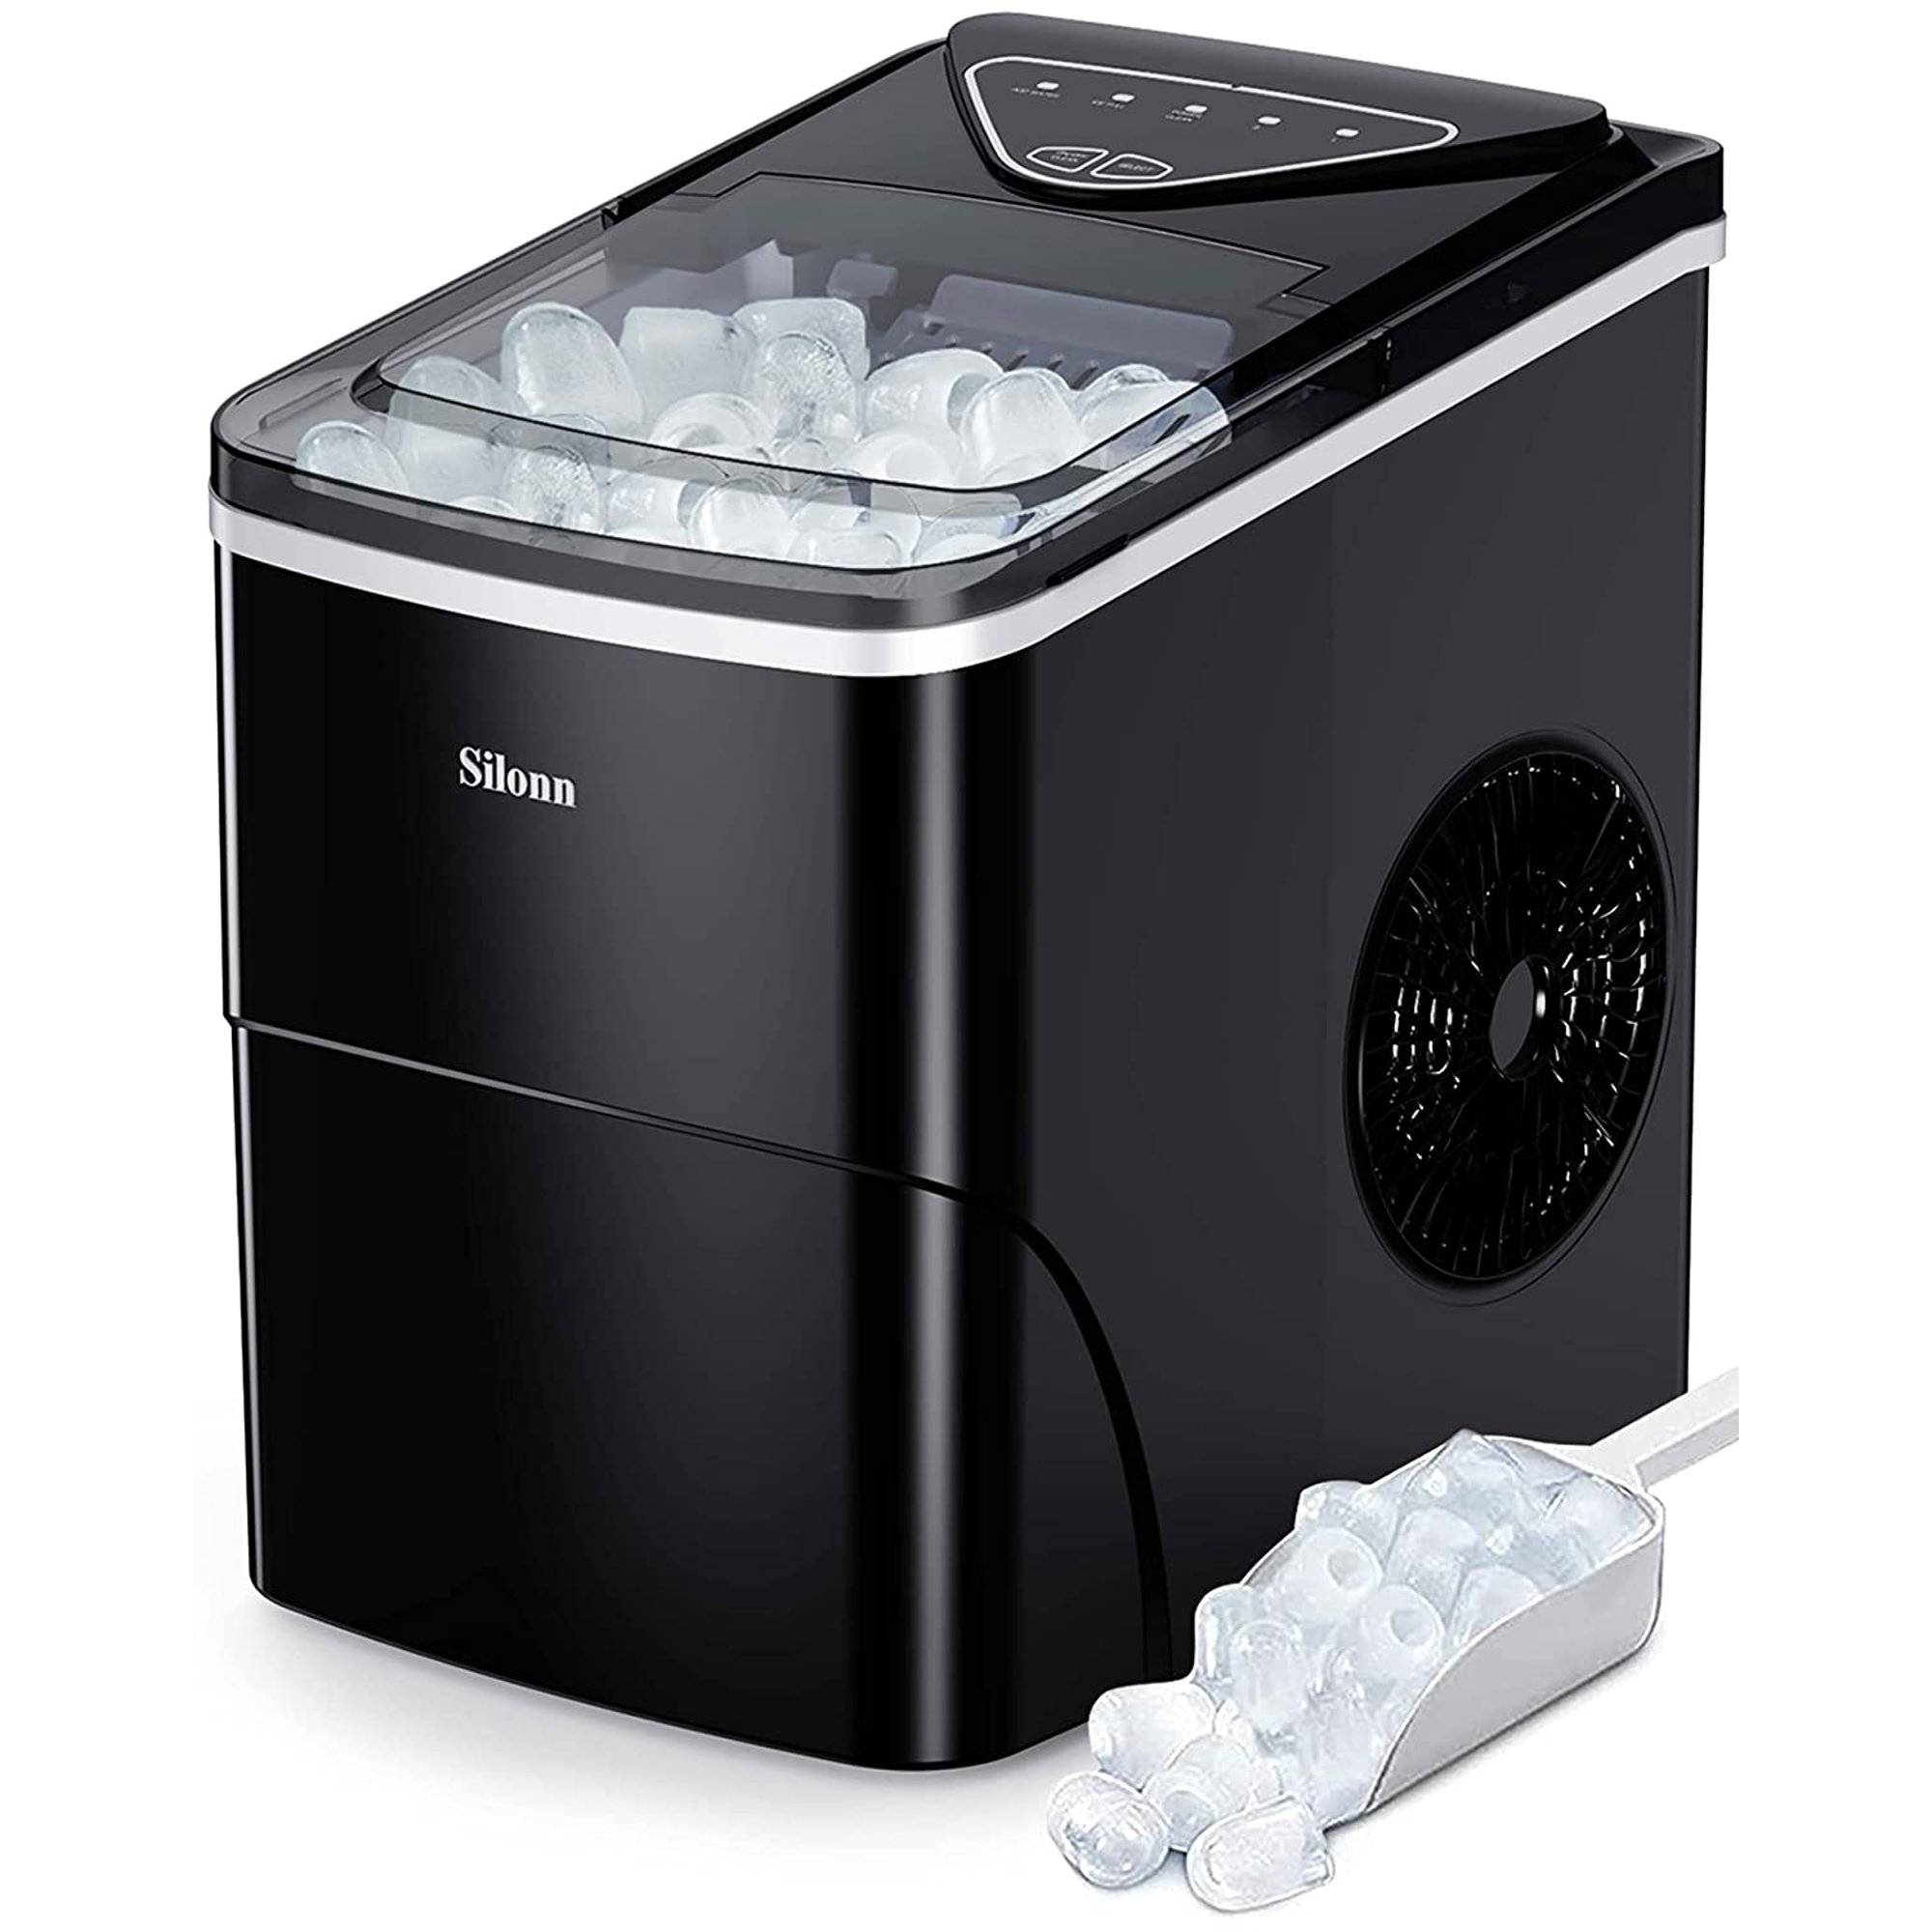  Silonn Countertop Ice Maker Machine with Handle, Portable Makers  Countertop, Makes up to 27 lbs. of Per Day, 9 Cubes in 7 Mins,  Self-Cleaning Scoop and Basket, Blue, 12 x 9